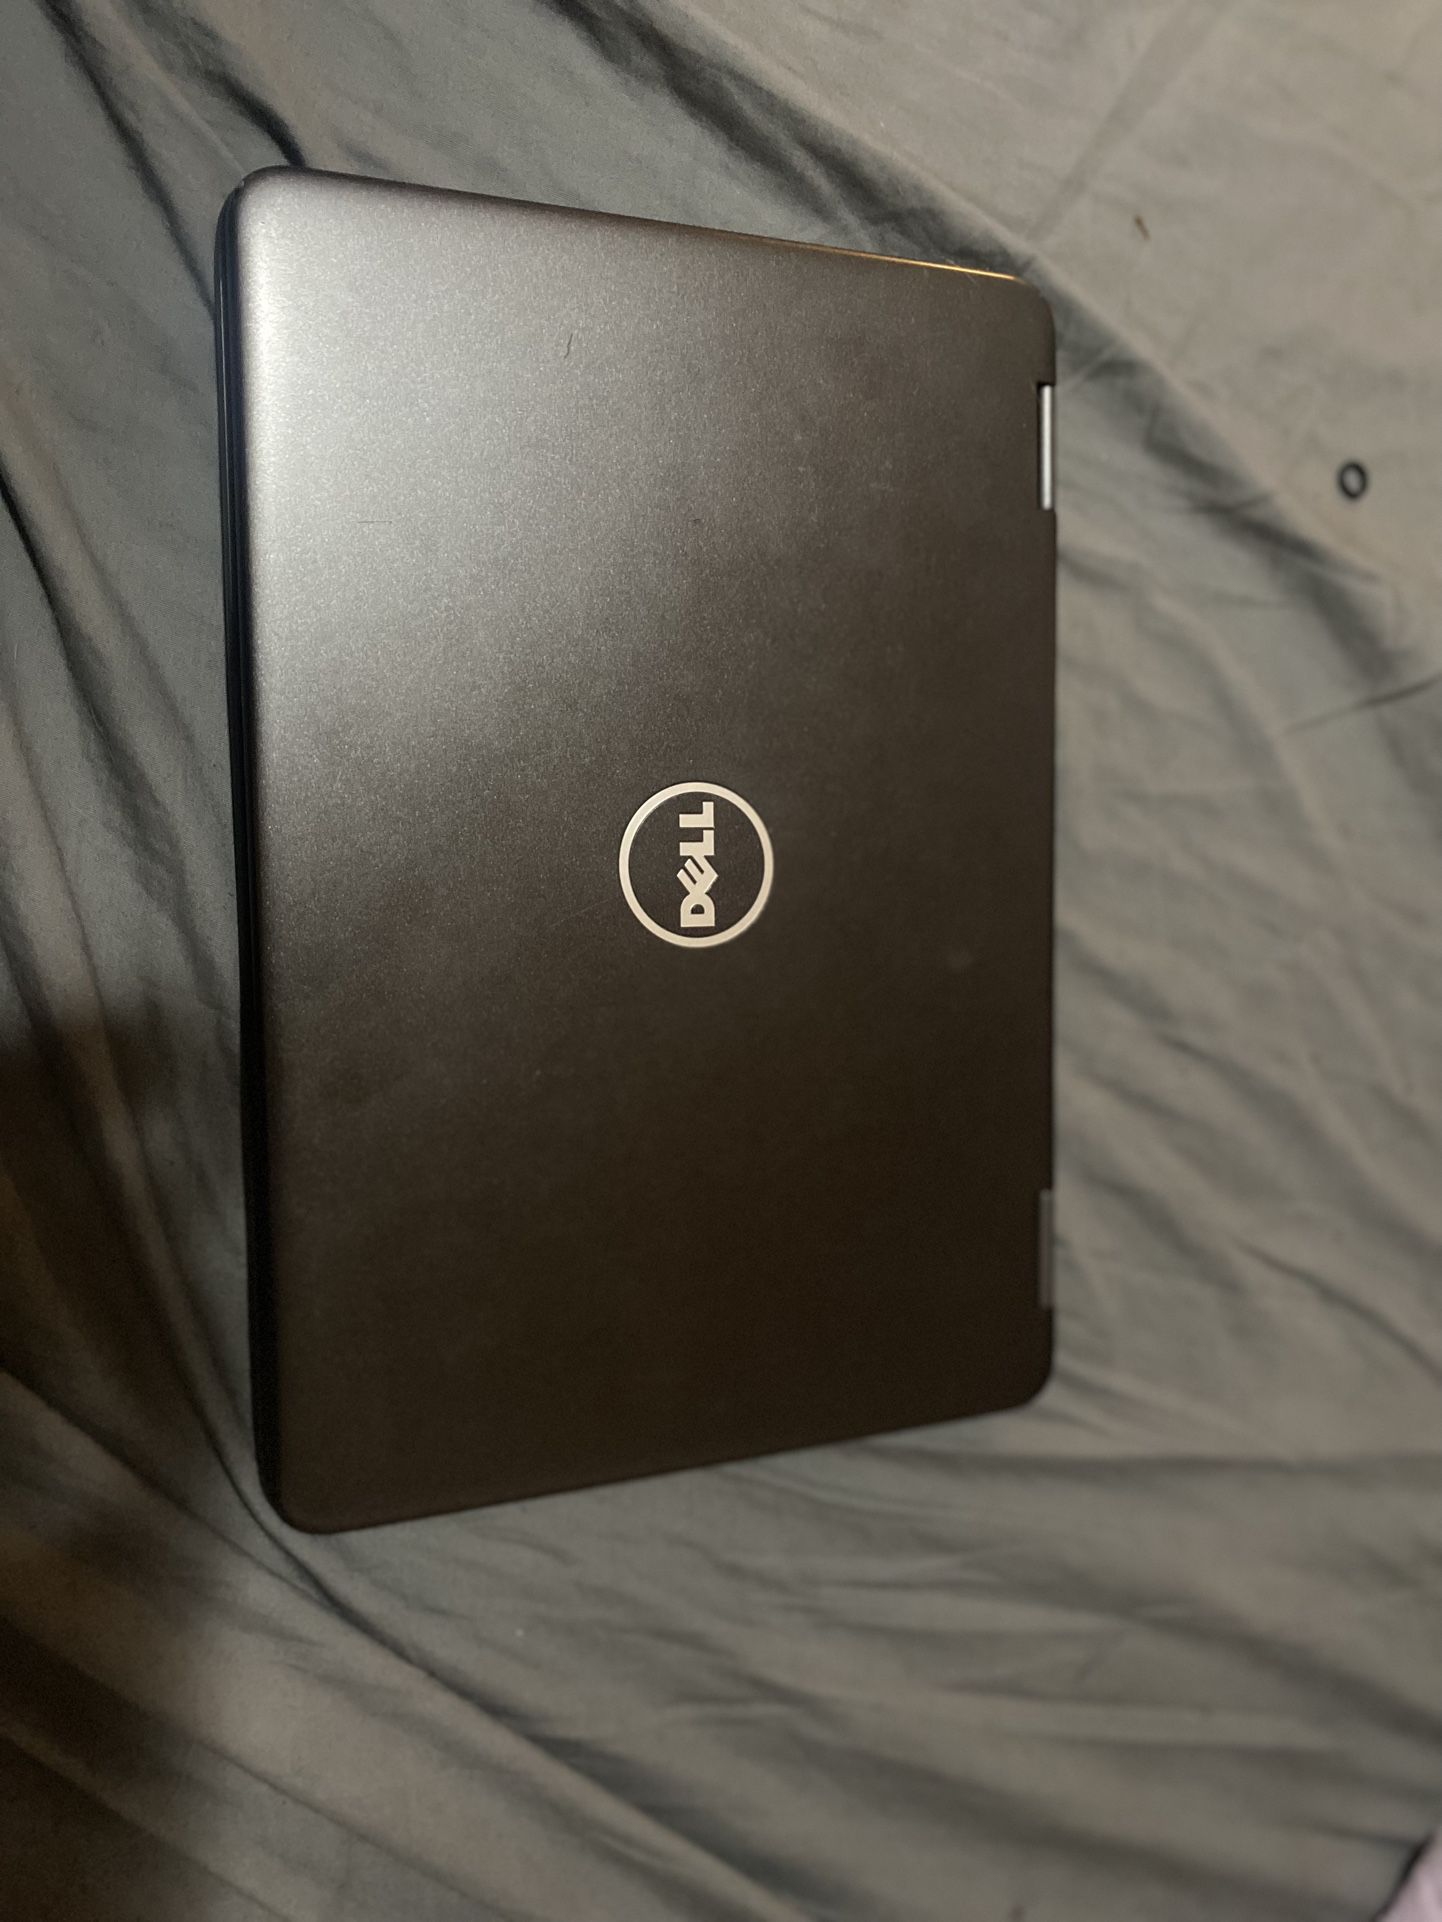 Dell 2 In 1 Convertible Touchscreen Laptop